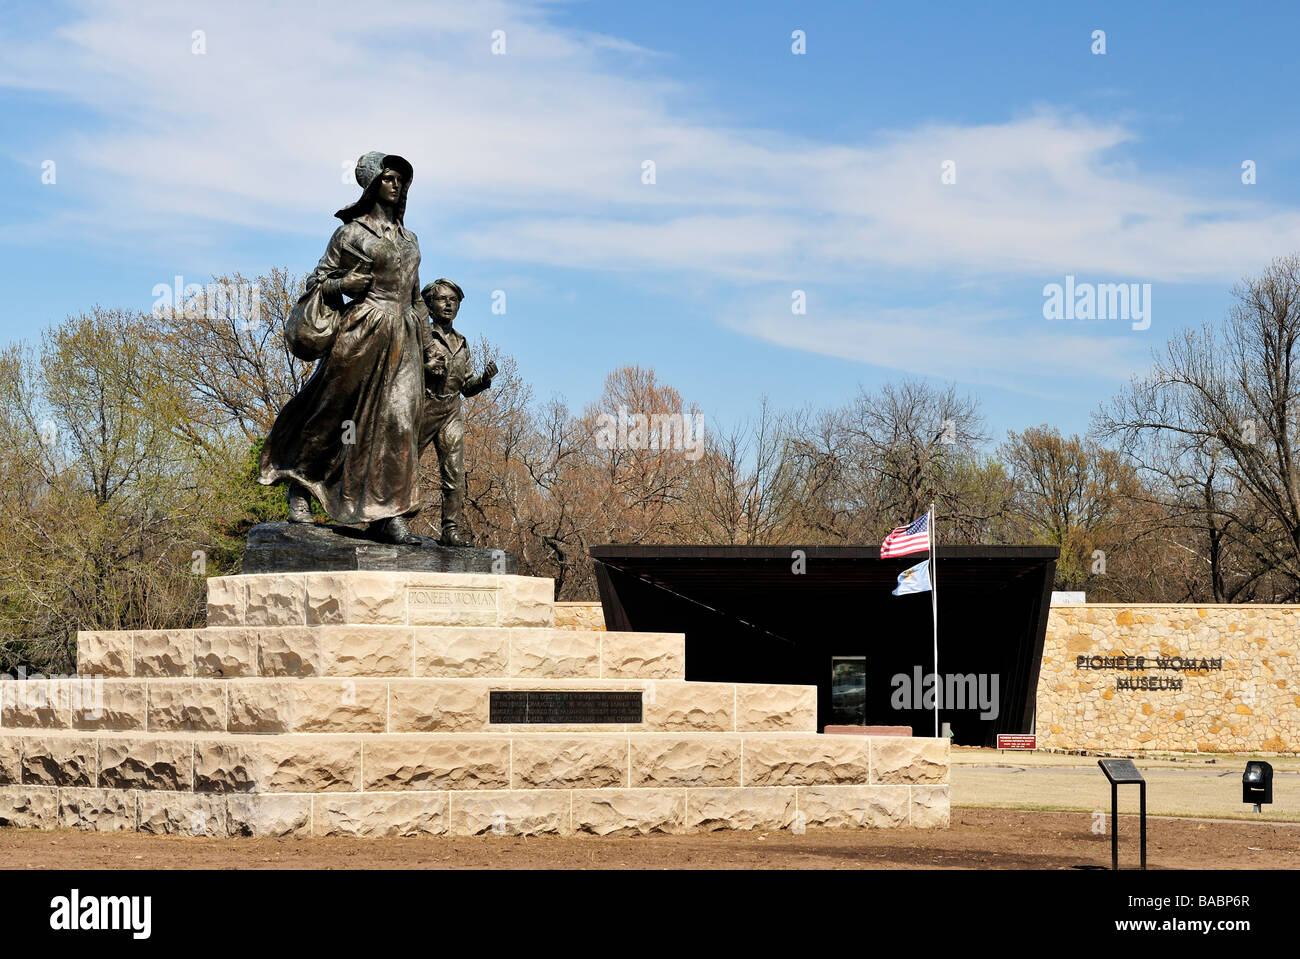 Pioneer Woman sculpture in Ponca City, Oklahoma, USA, with the Pioneer Woman museum in the background. Bryant Baker. Stock Photo